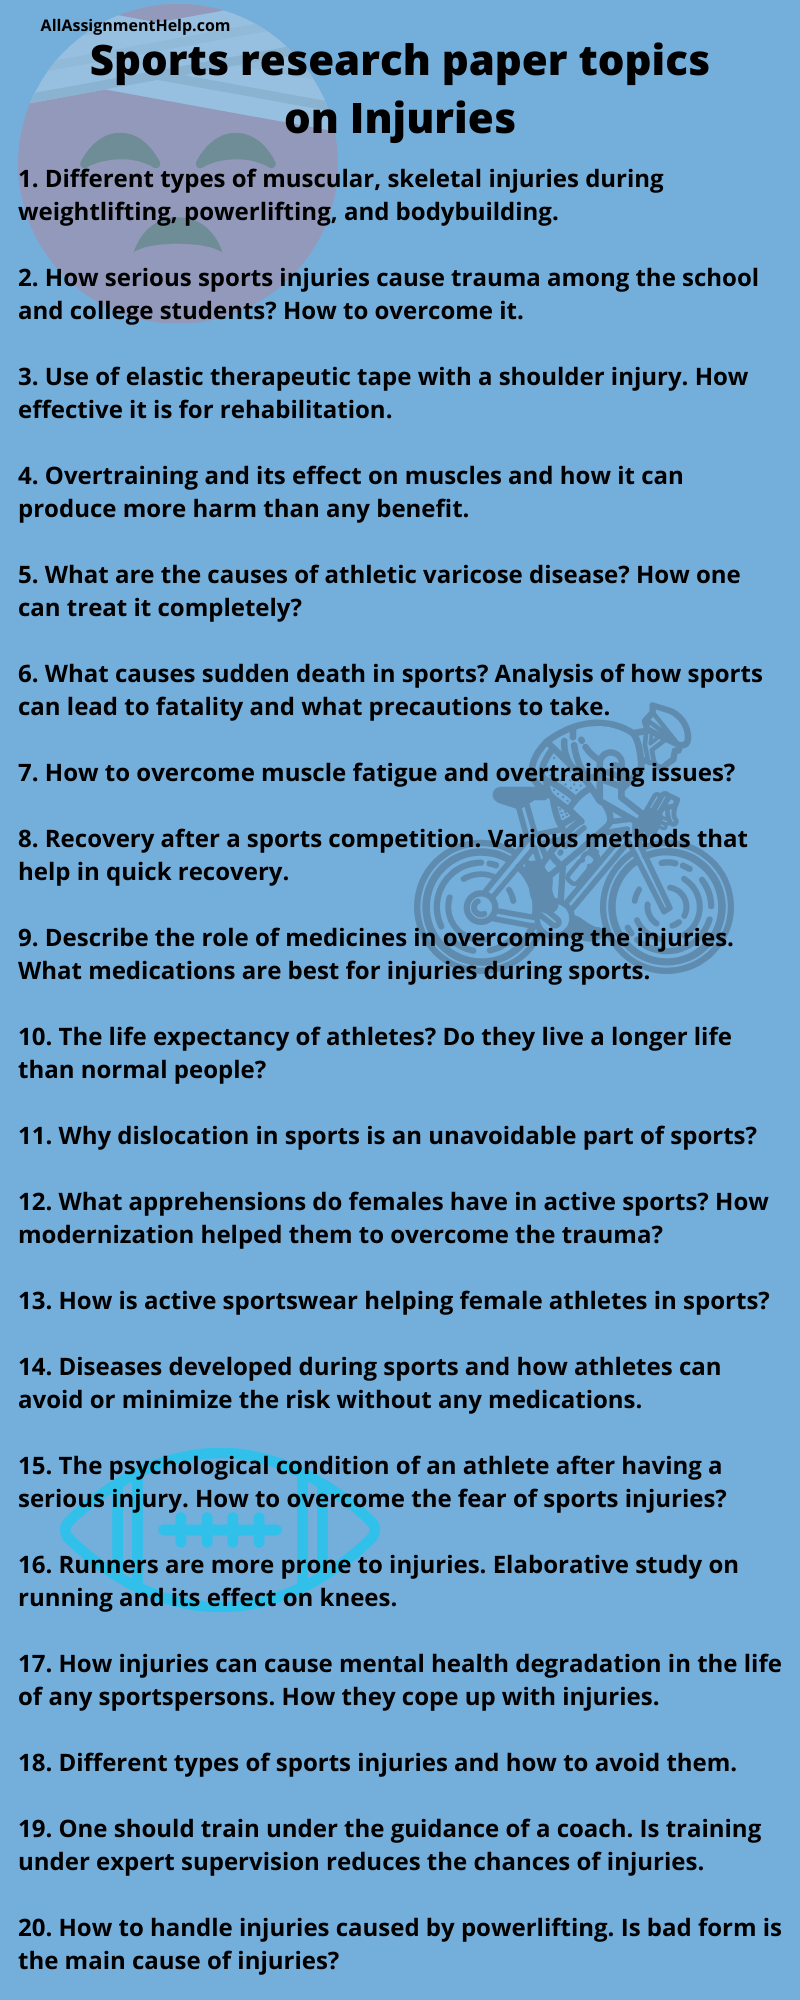 sports-research-paper-topics-injuries